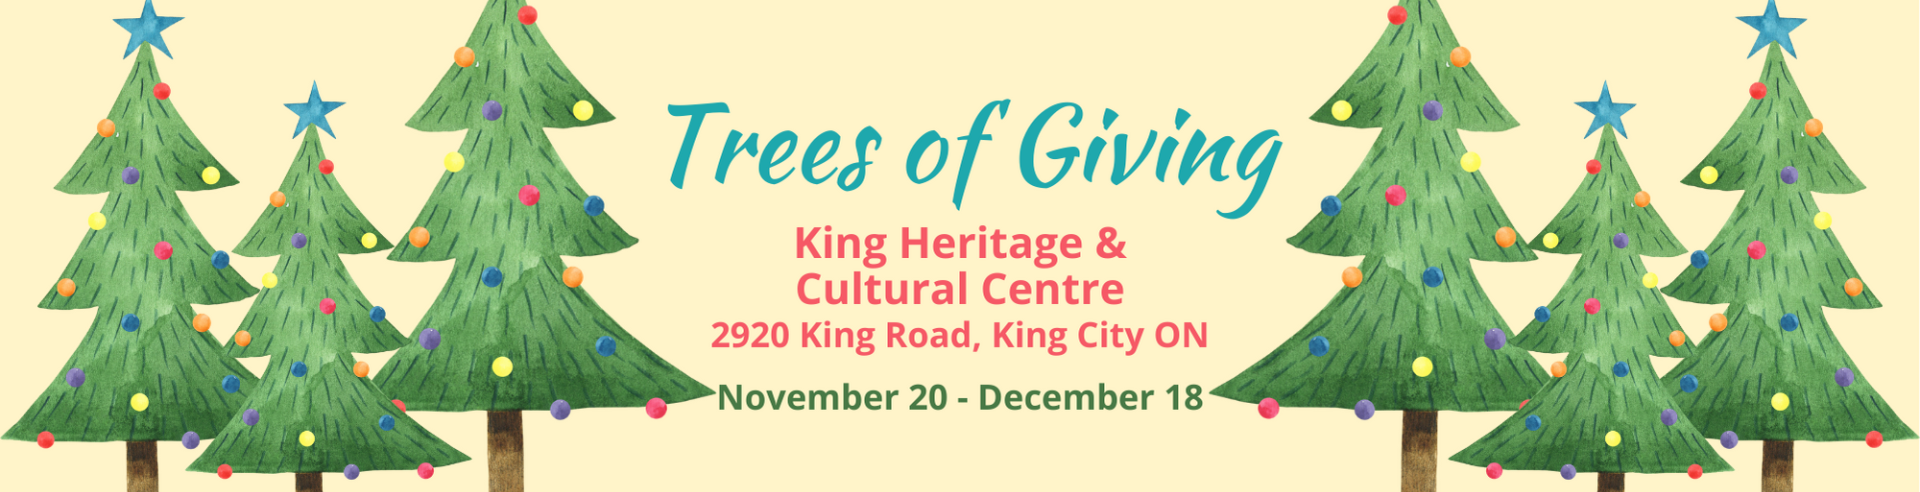 Trees of Giving Banner